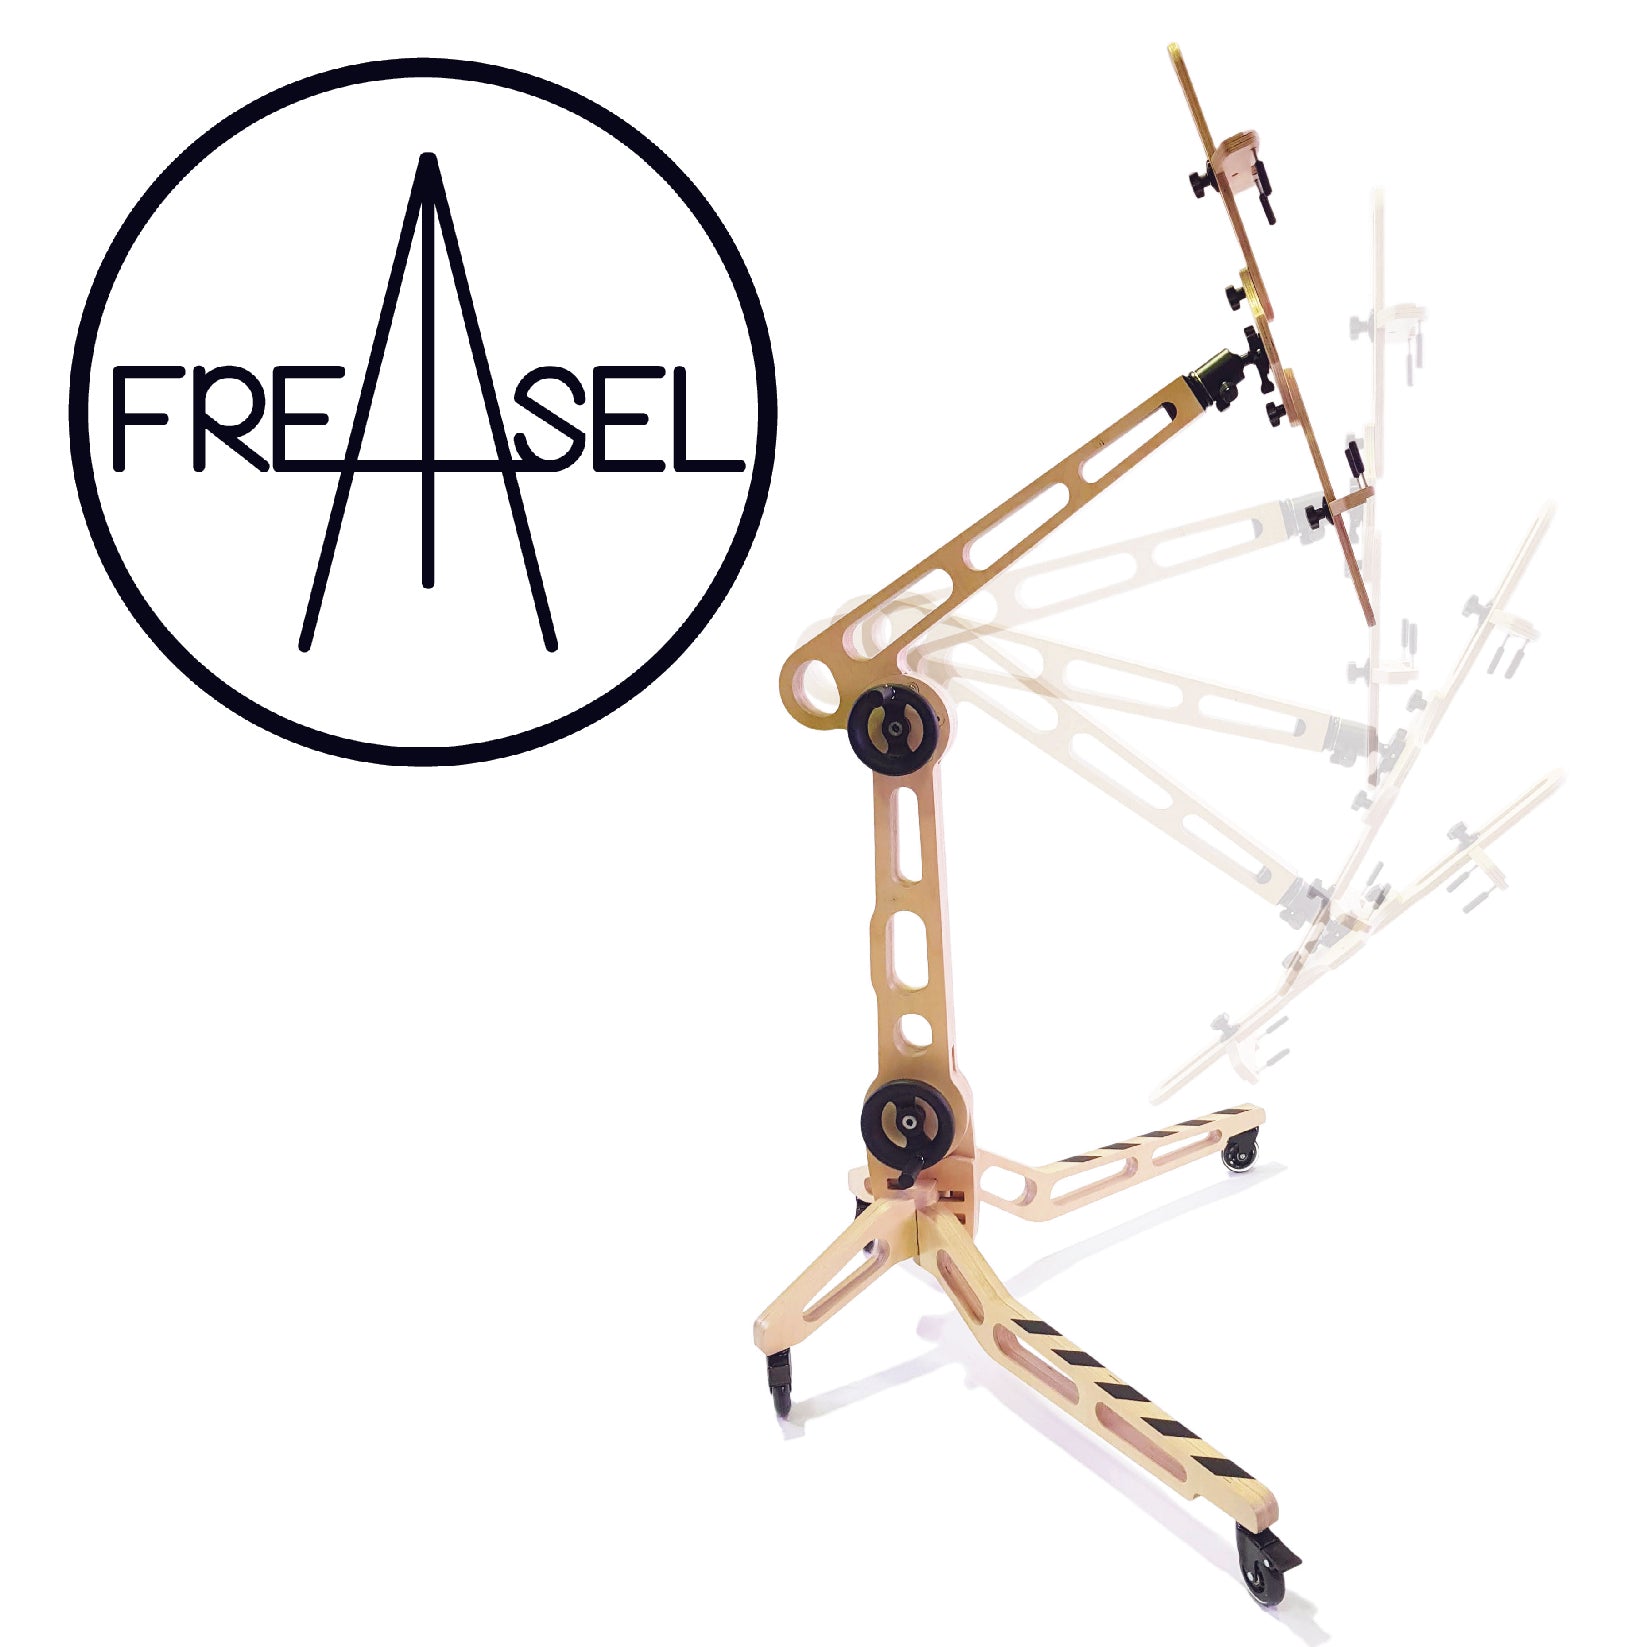 Freasel wheelchair accessible easel product image side view with logo